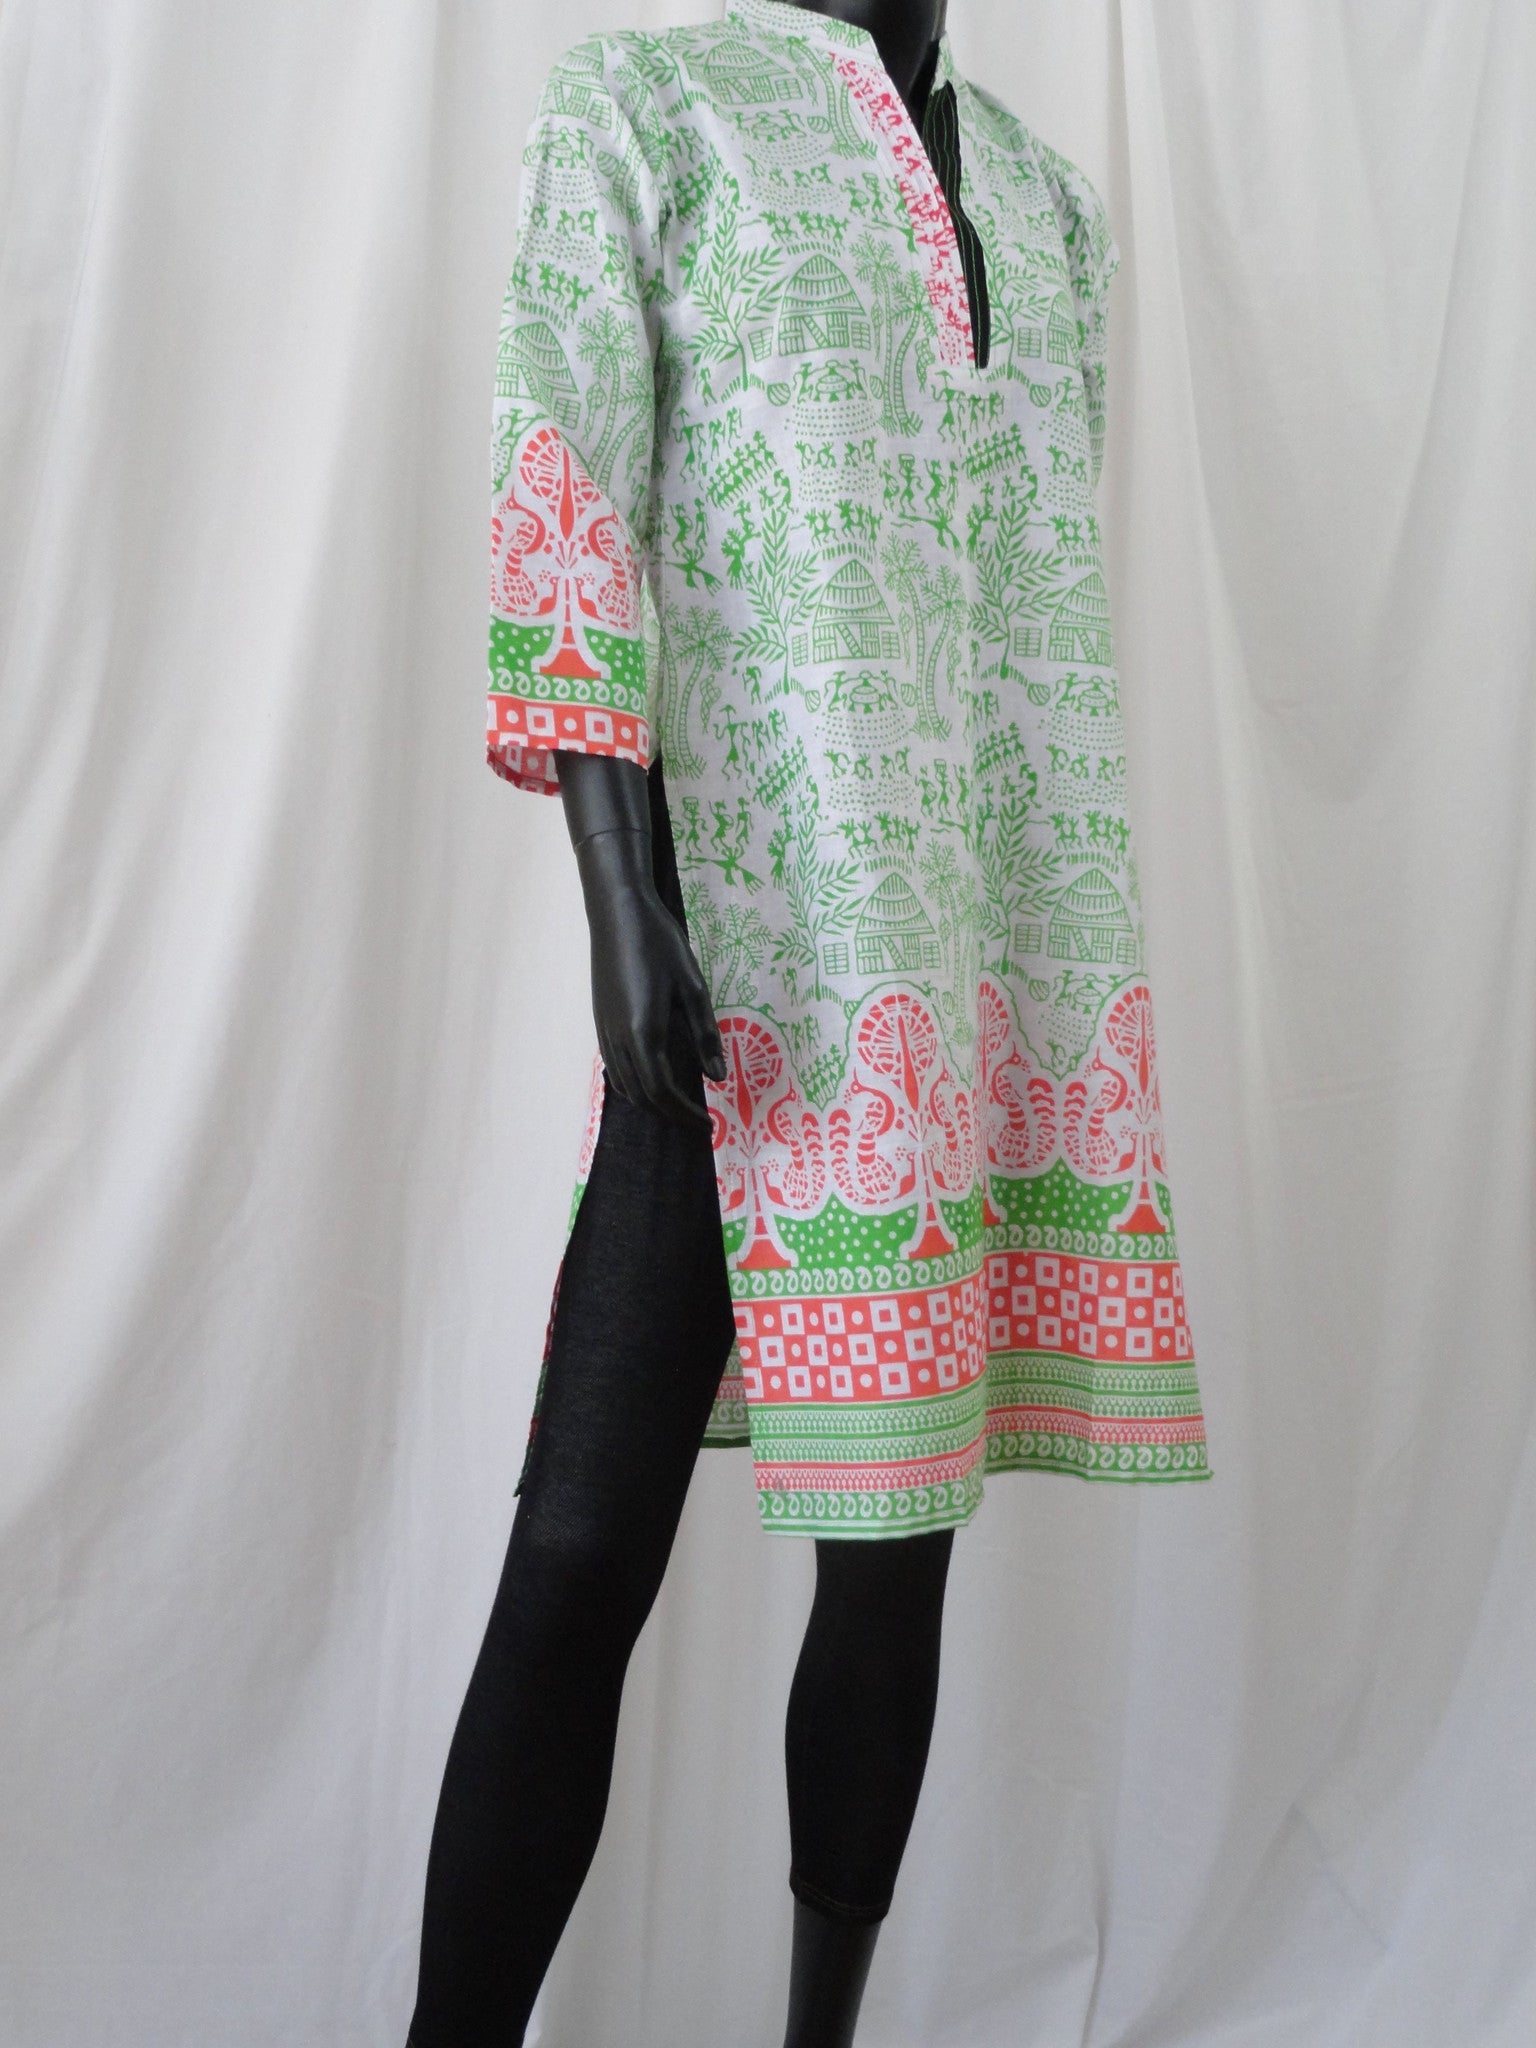 White Yoga tunic or top. Soft Cotton long dress top with cave art